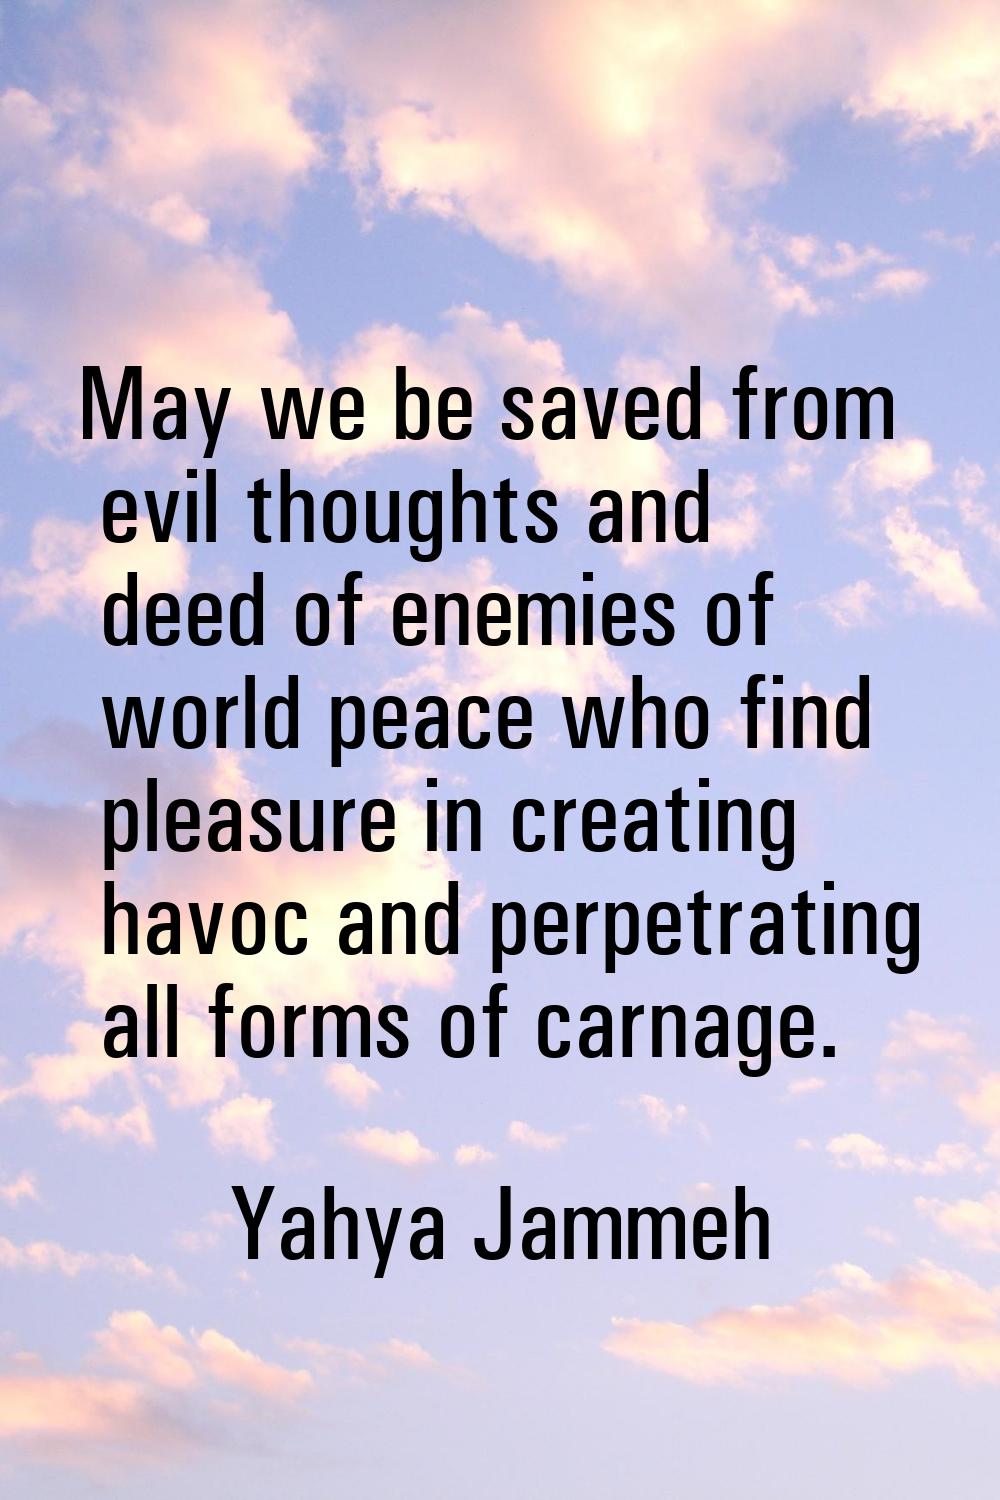 May we be saved from evil thoughts and deed of enemies of world peace who find pleasure in creating